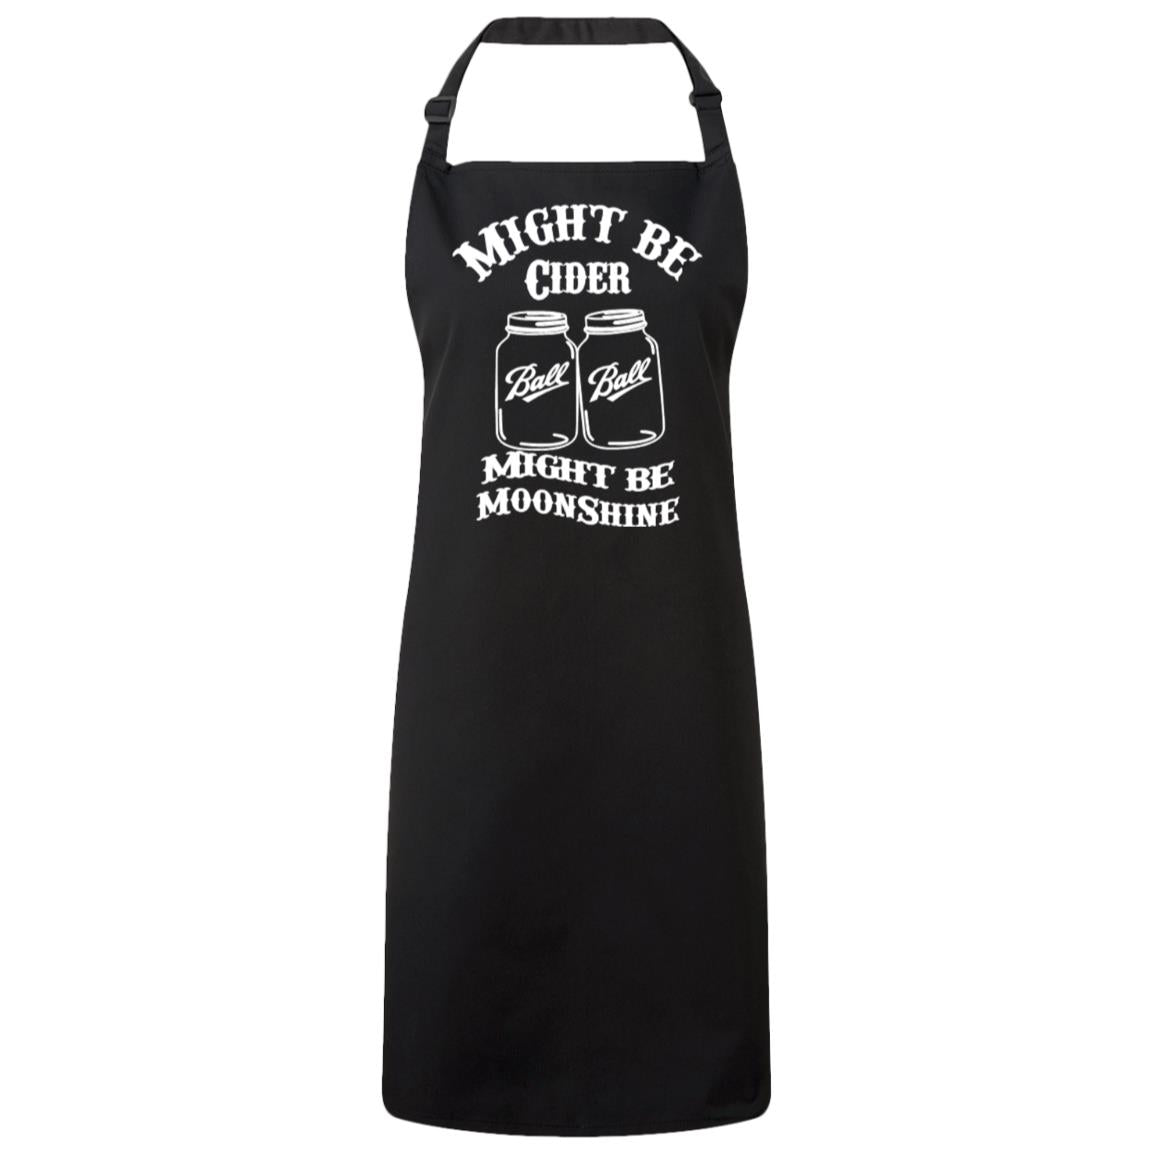 Might Be Cider Might Be Moonshine" Canning Apron - Expressive DeZien 